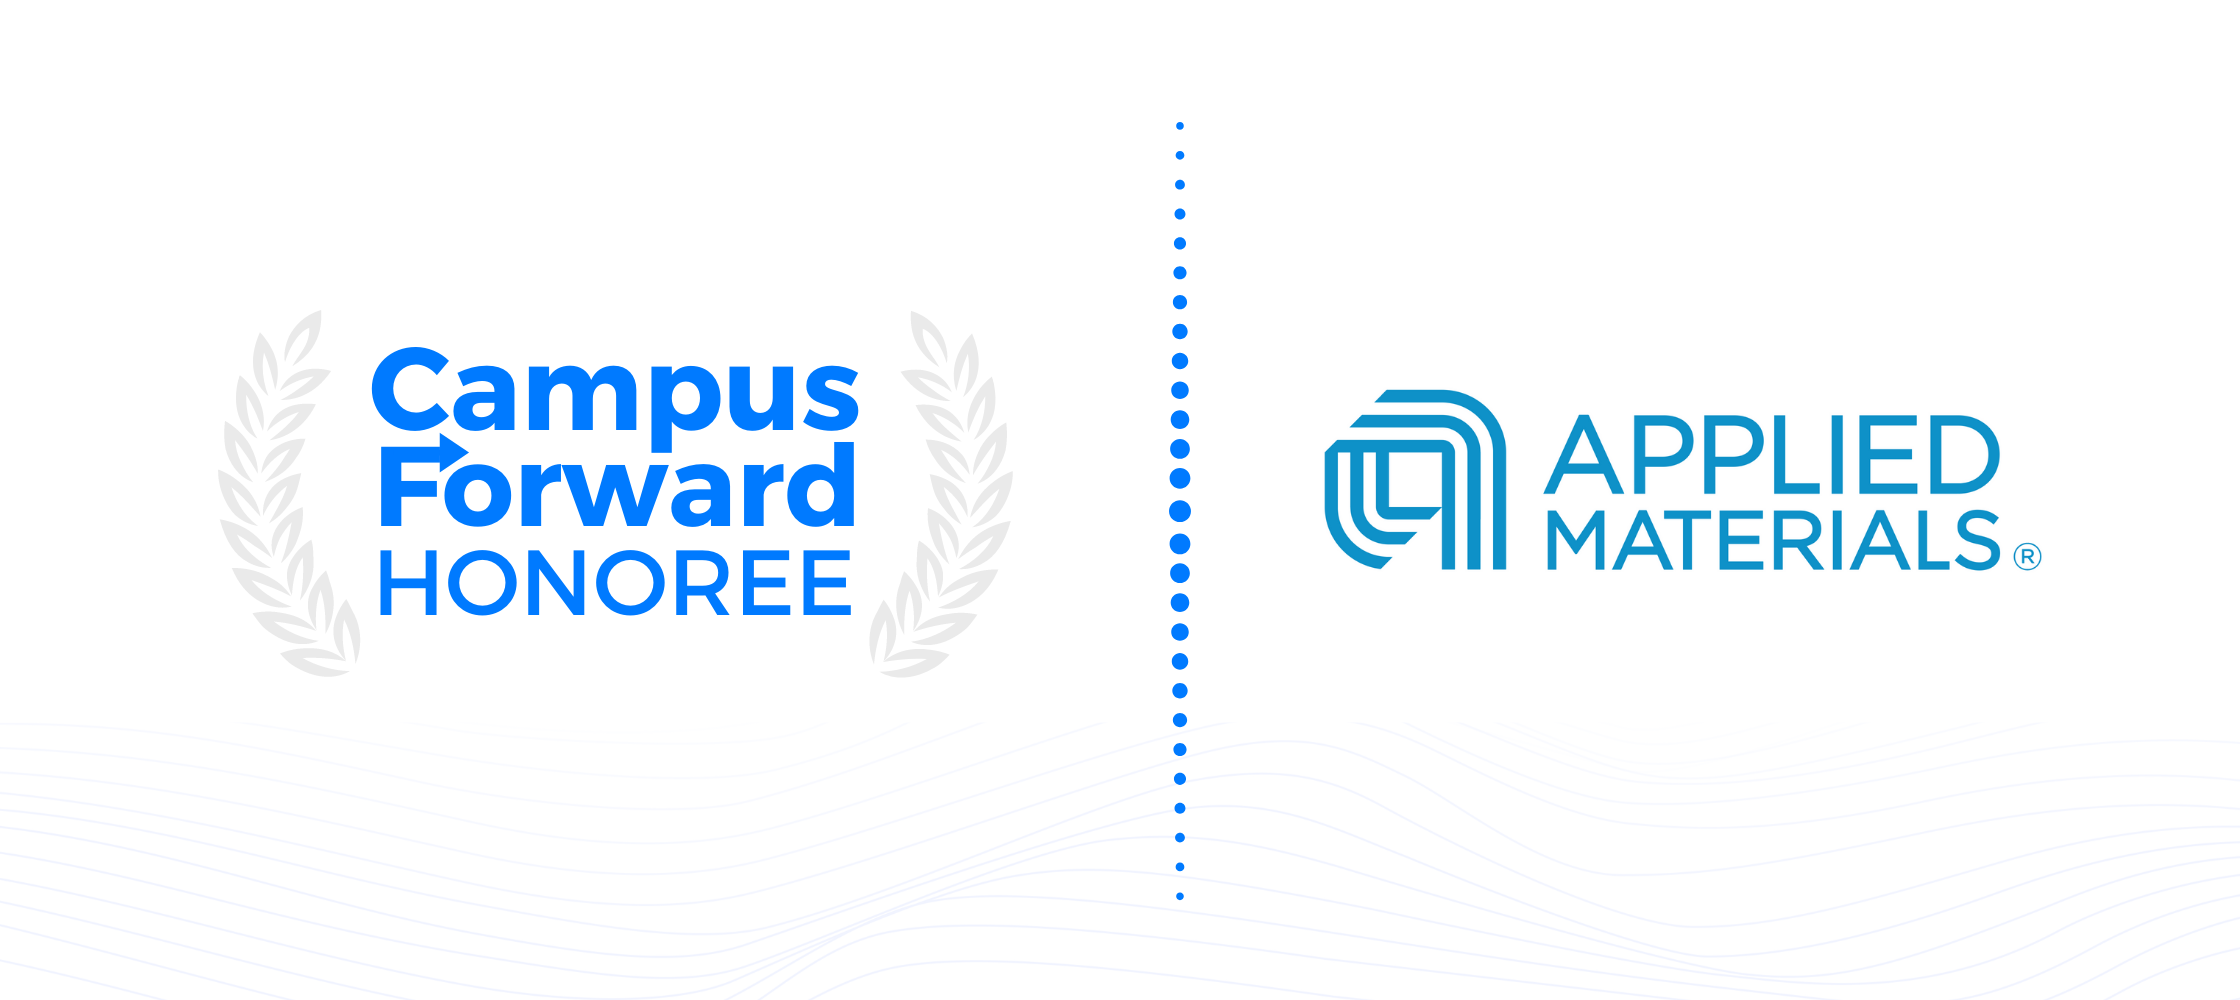 Campus Forward Honoree - Applied Materials